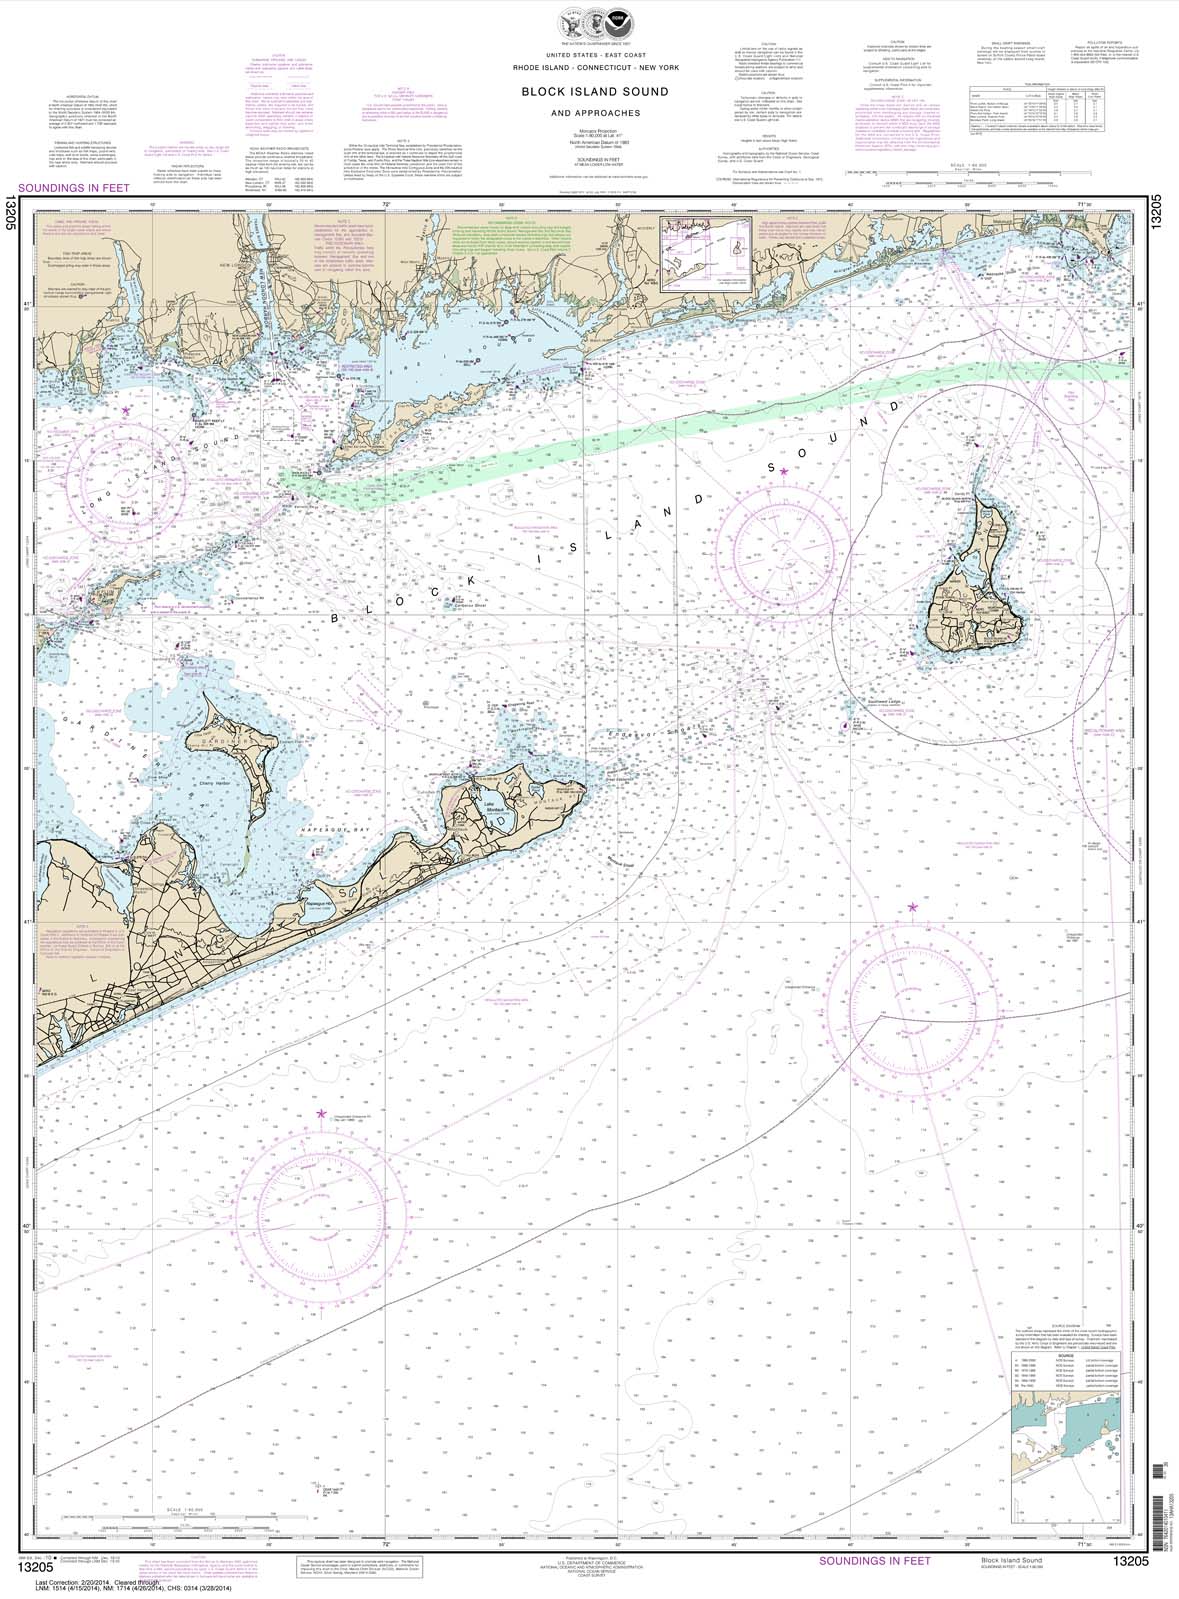 Block Island Sound and Approaches